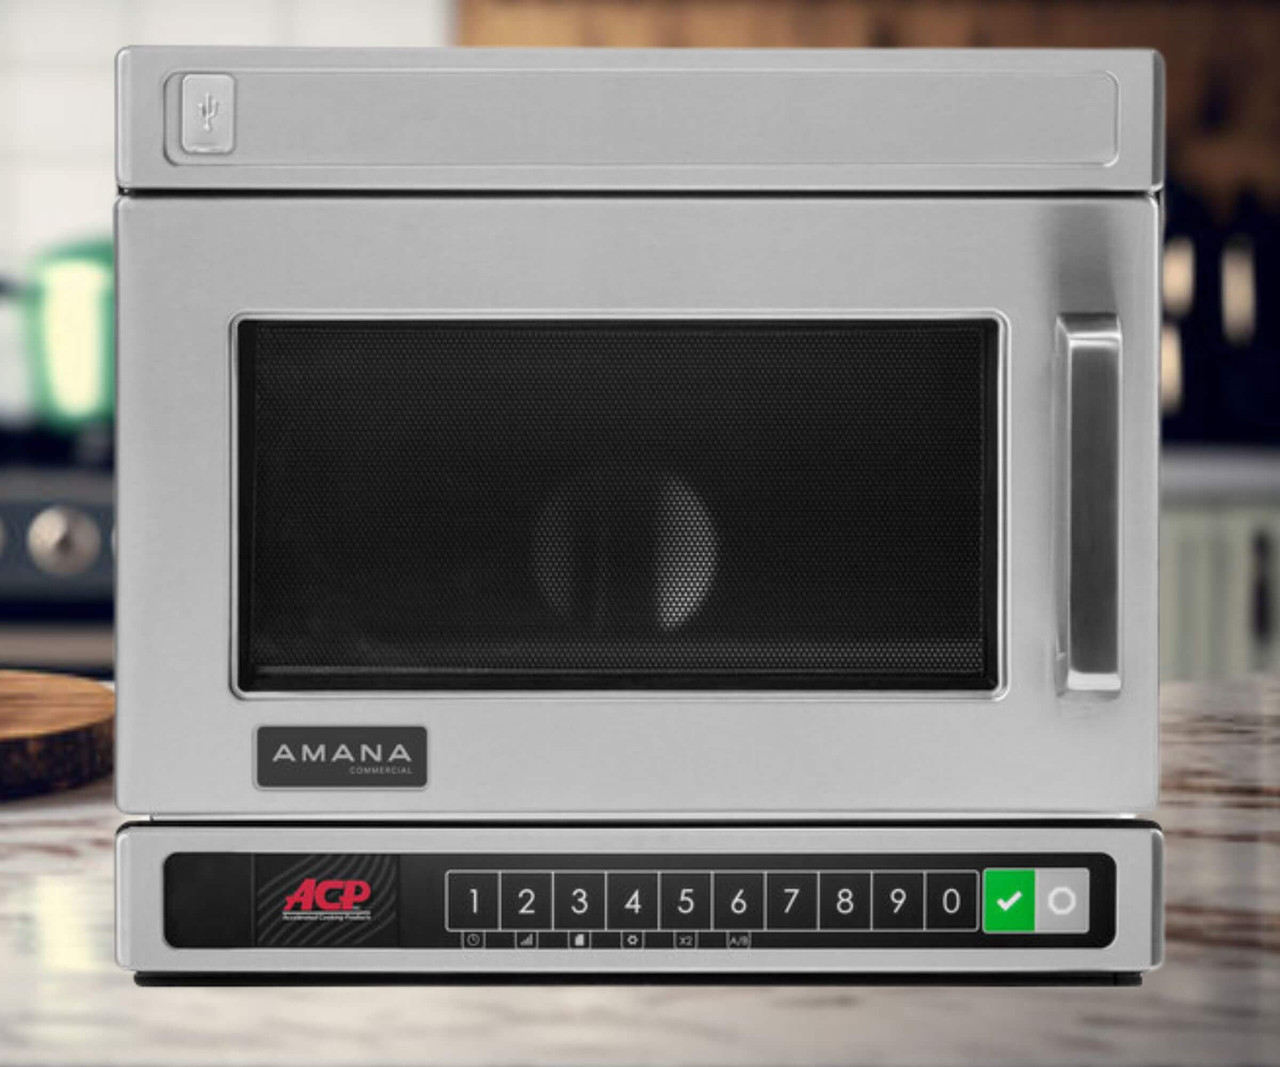 Amana Heavy-Duty Stainless Steel Compact Commercial Microwave - 208/240V, 1800W | Powerful Performance in a Compact Design